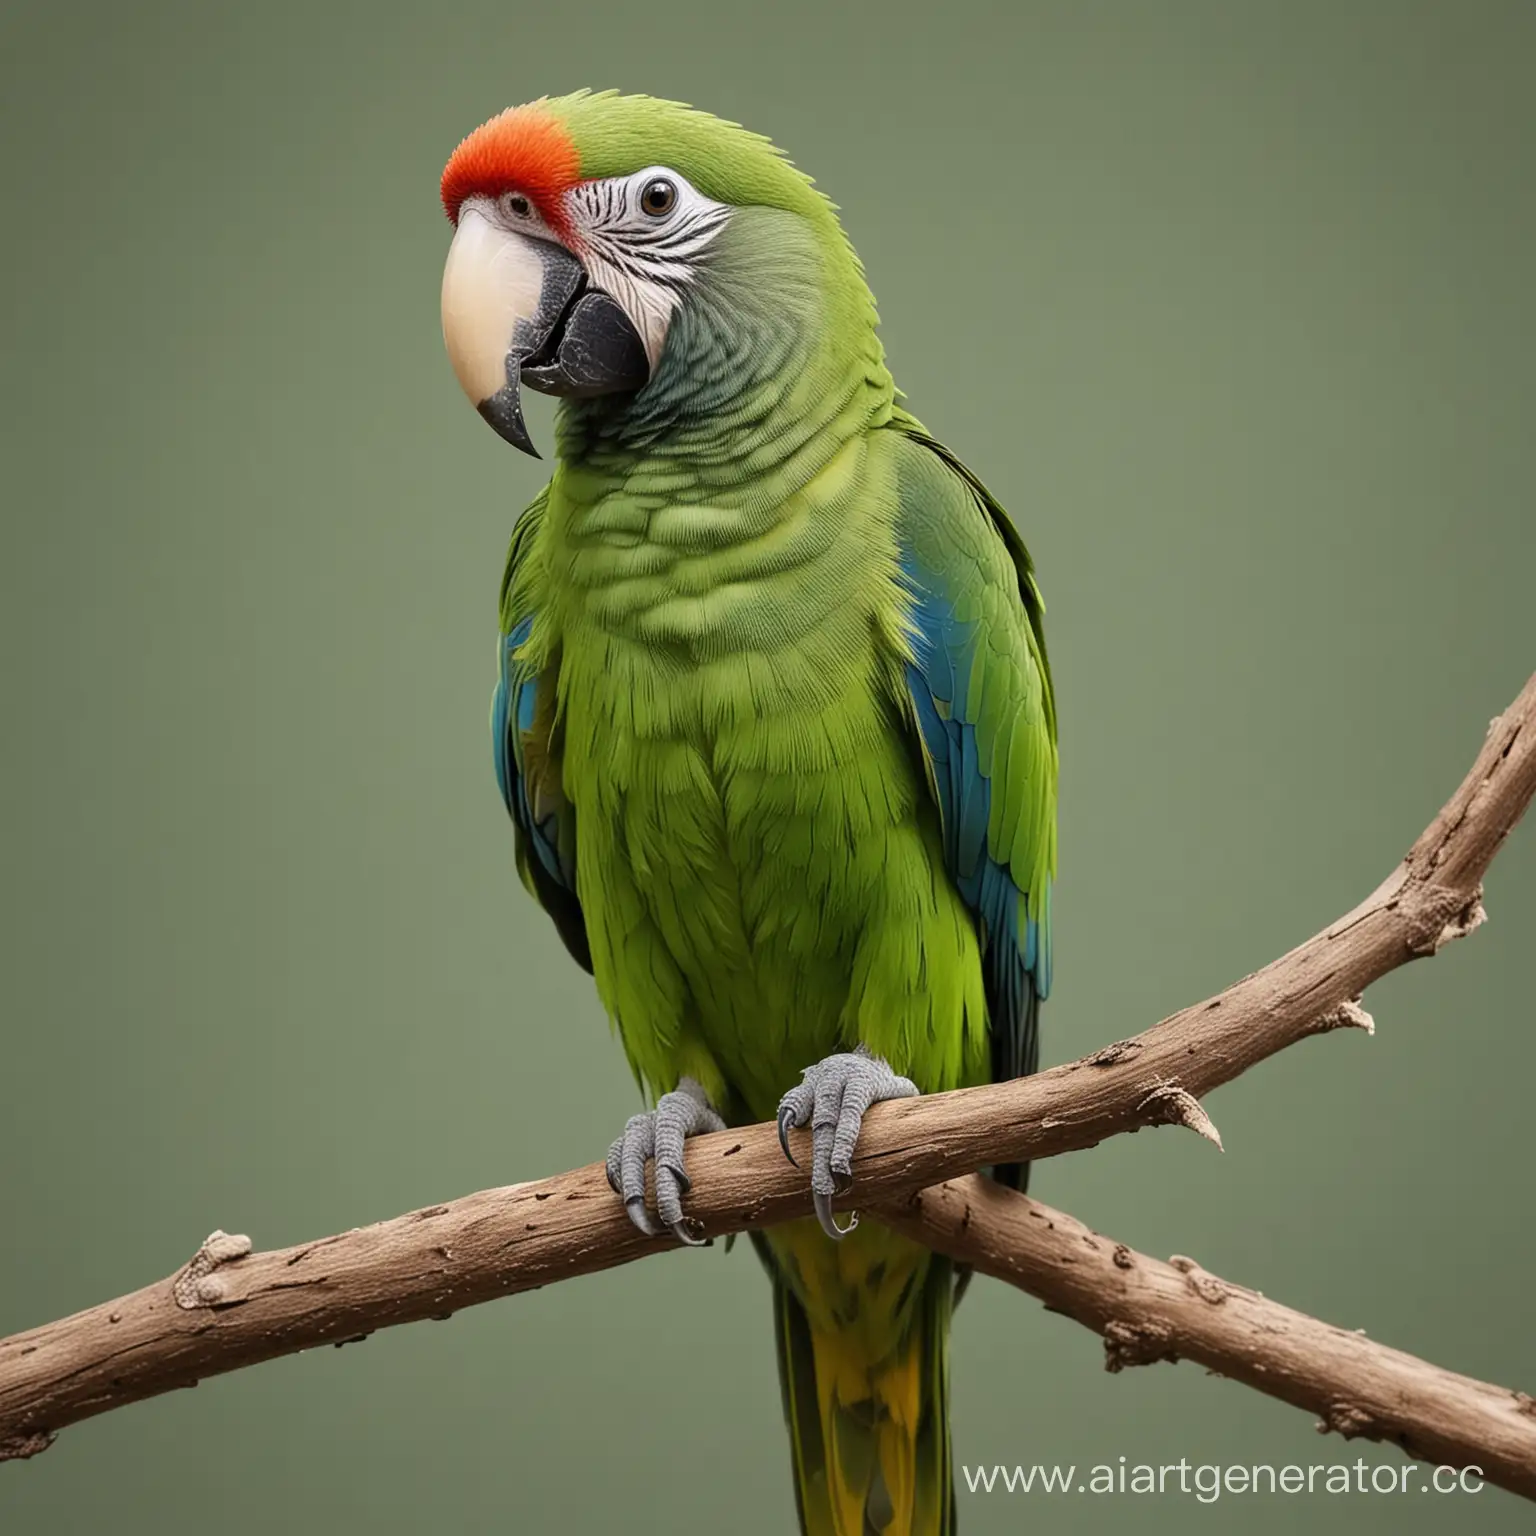 Female-Parrot-Perching-on-a-Branch